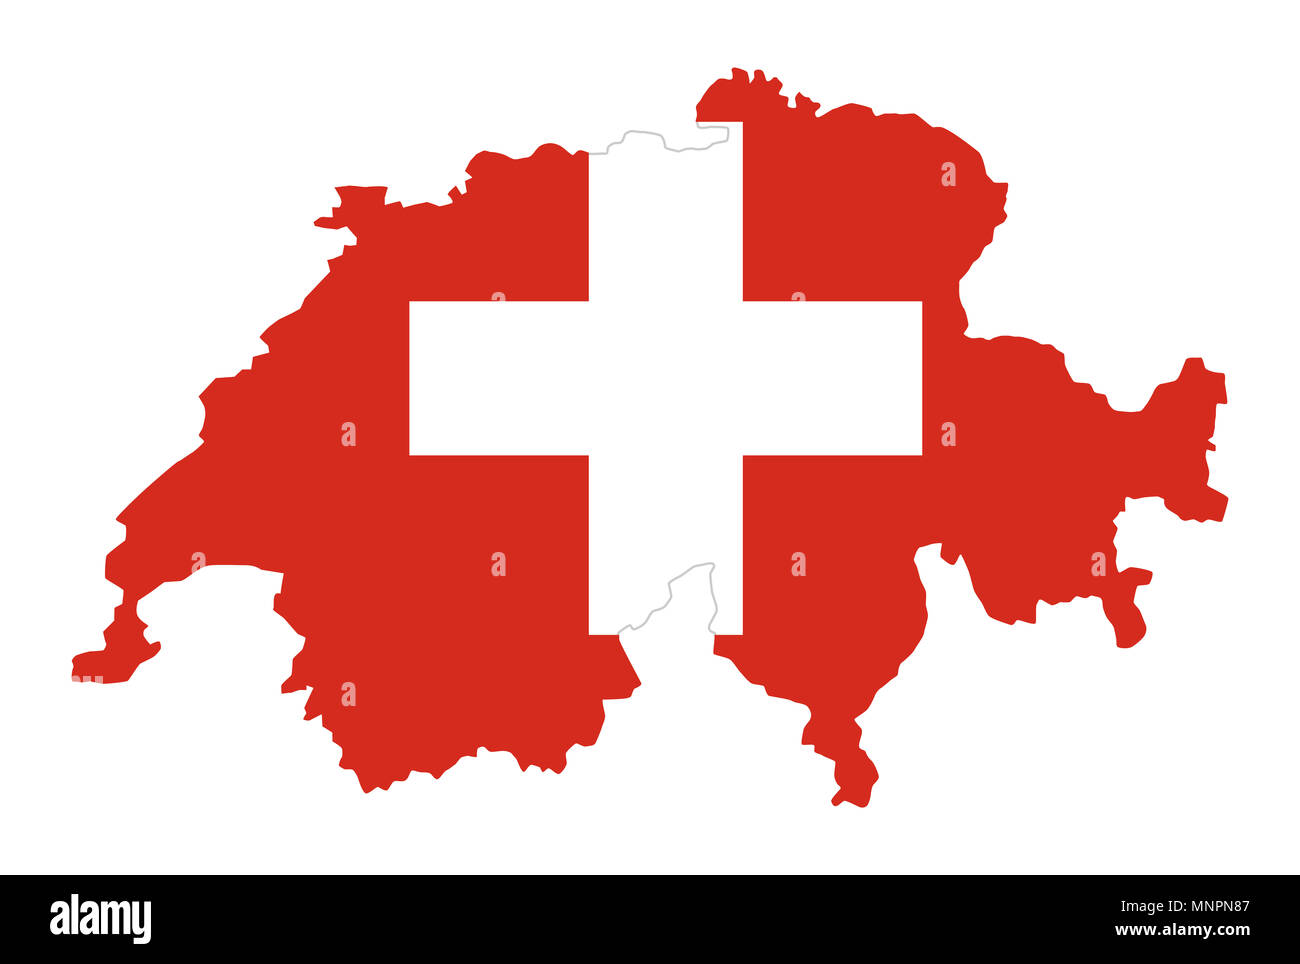 Flag of Switzerland in country silhouette. Landmass and borders as outline, within the banner of the nation. Red flag with white cross. Illustration. Stock Photo